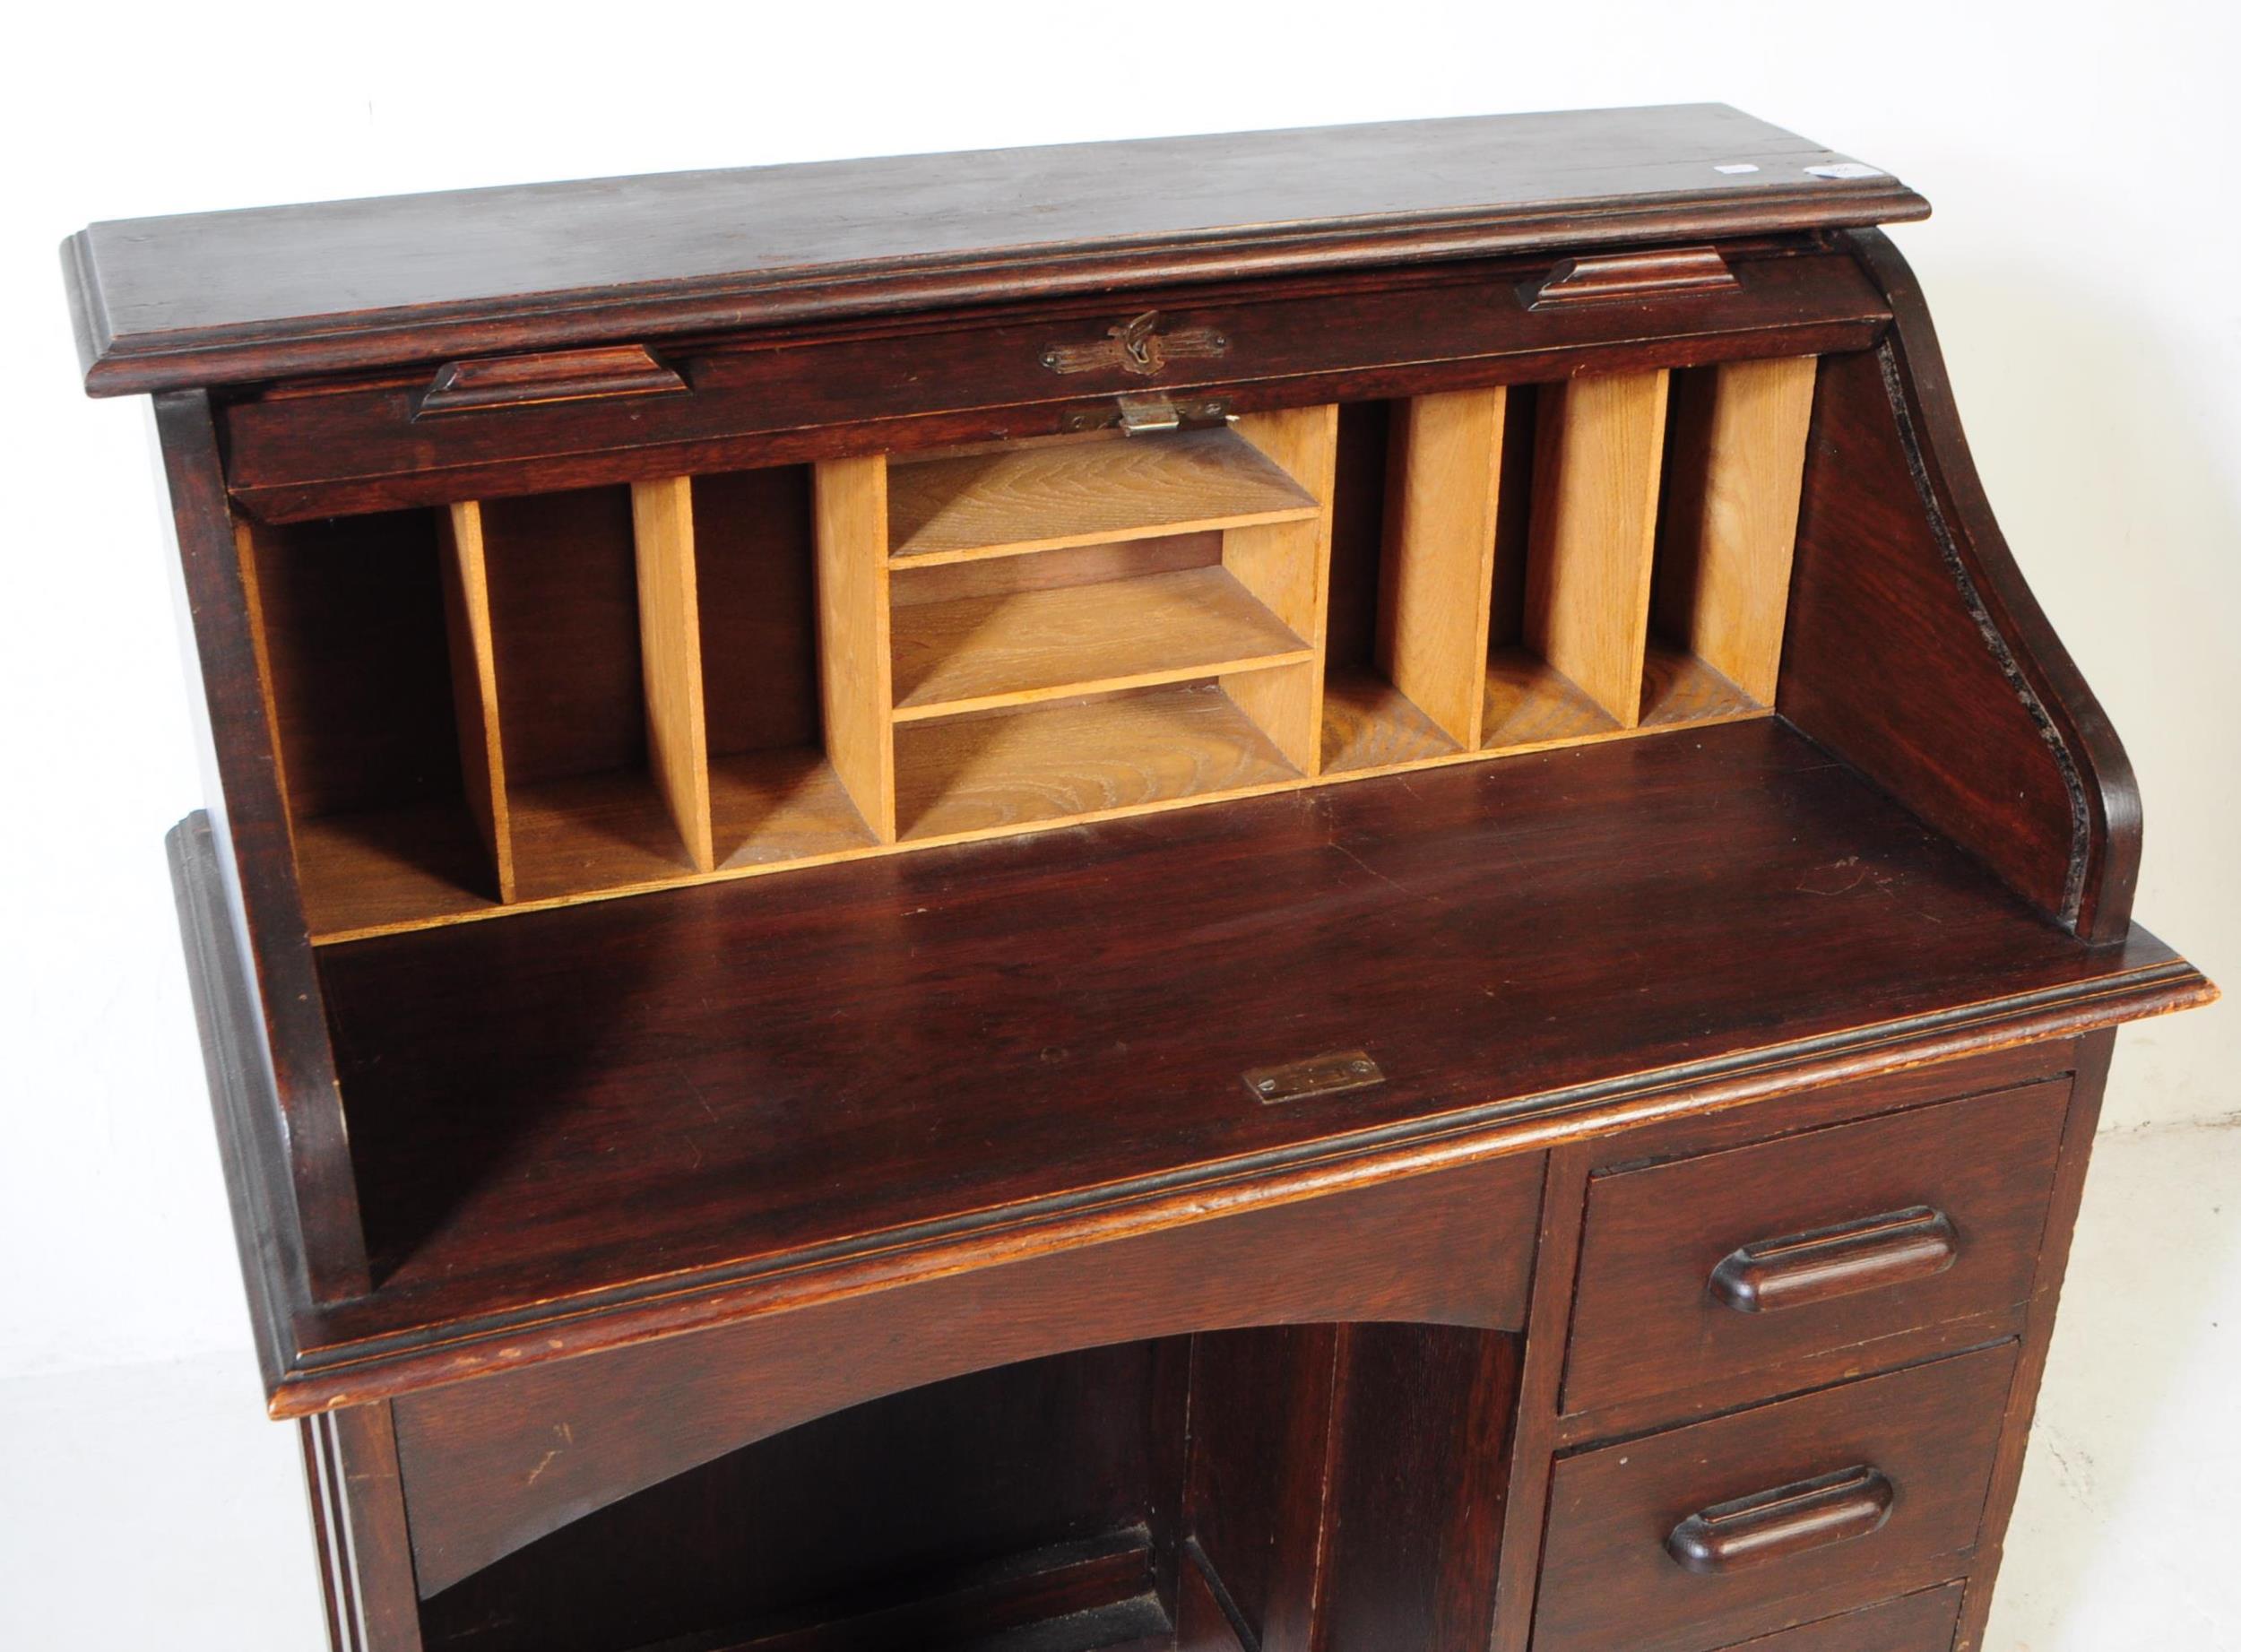 EARLY 20TH CENTURY MAHOGANY ROLL TOP DESK - Image 3 of 7